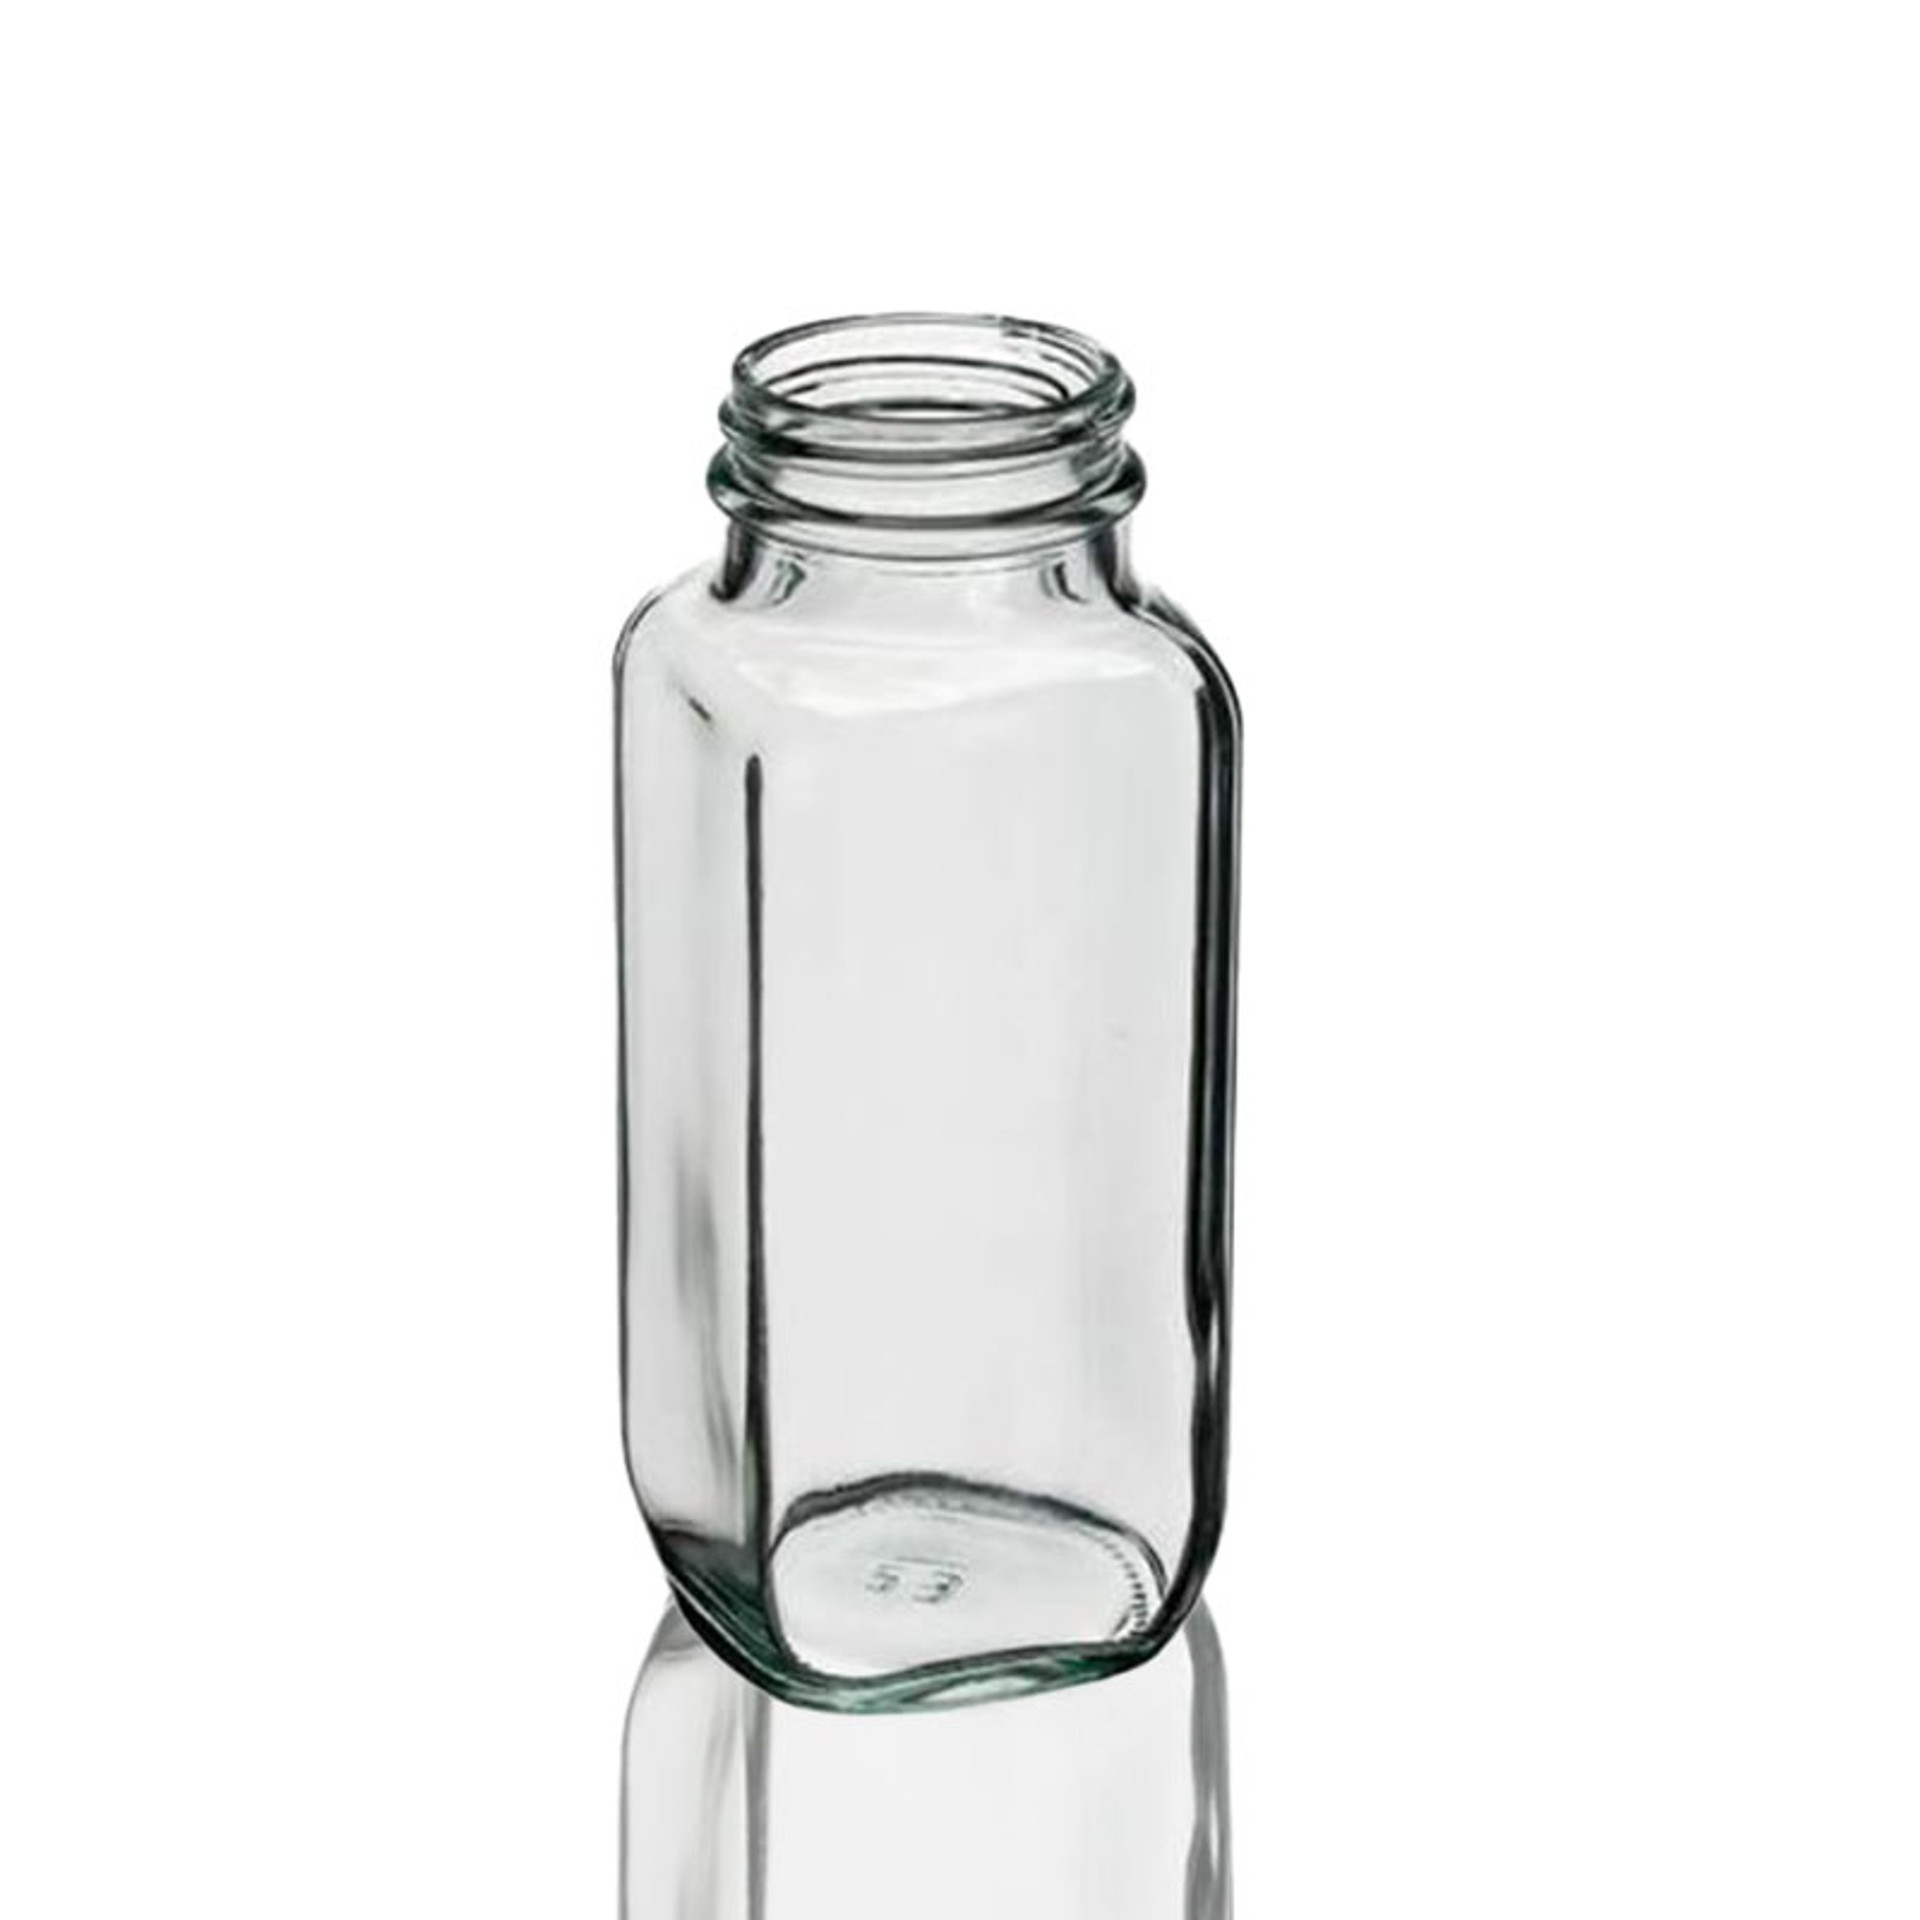 16oz (480ml) Flint (Clear) Glass French Square Bottle - 48-405 Neck